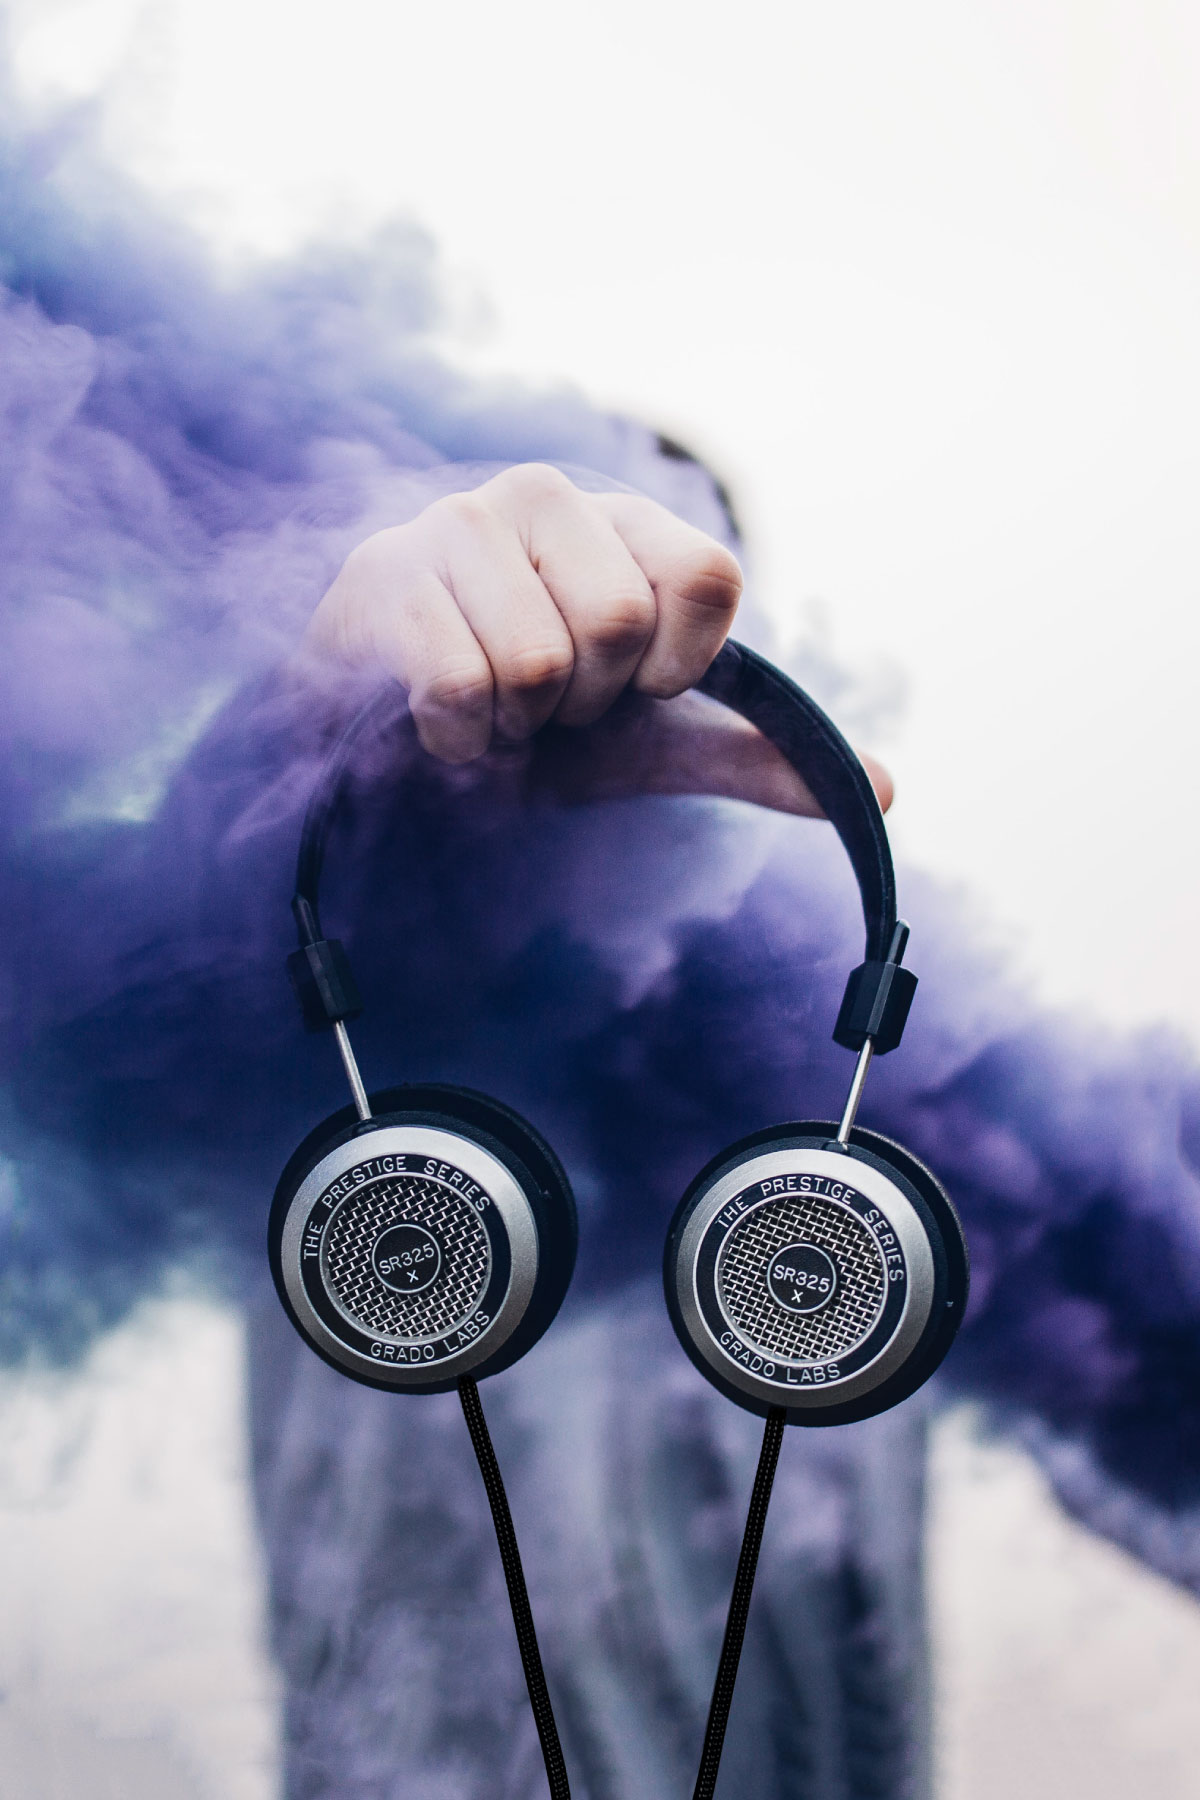 Photo of a person holding the sr325x headphones, surrounded by purple smoke.